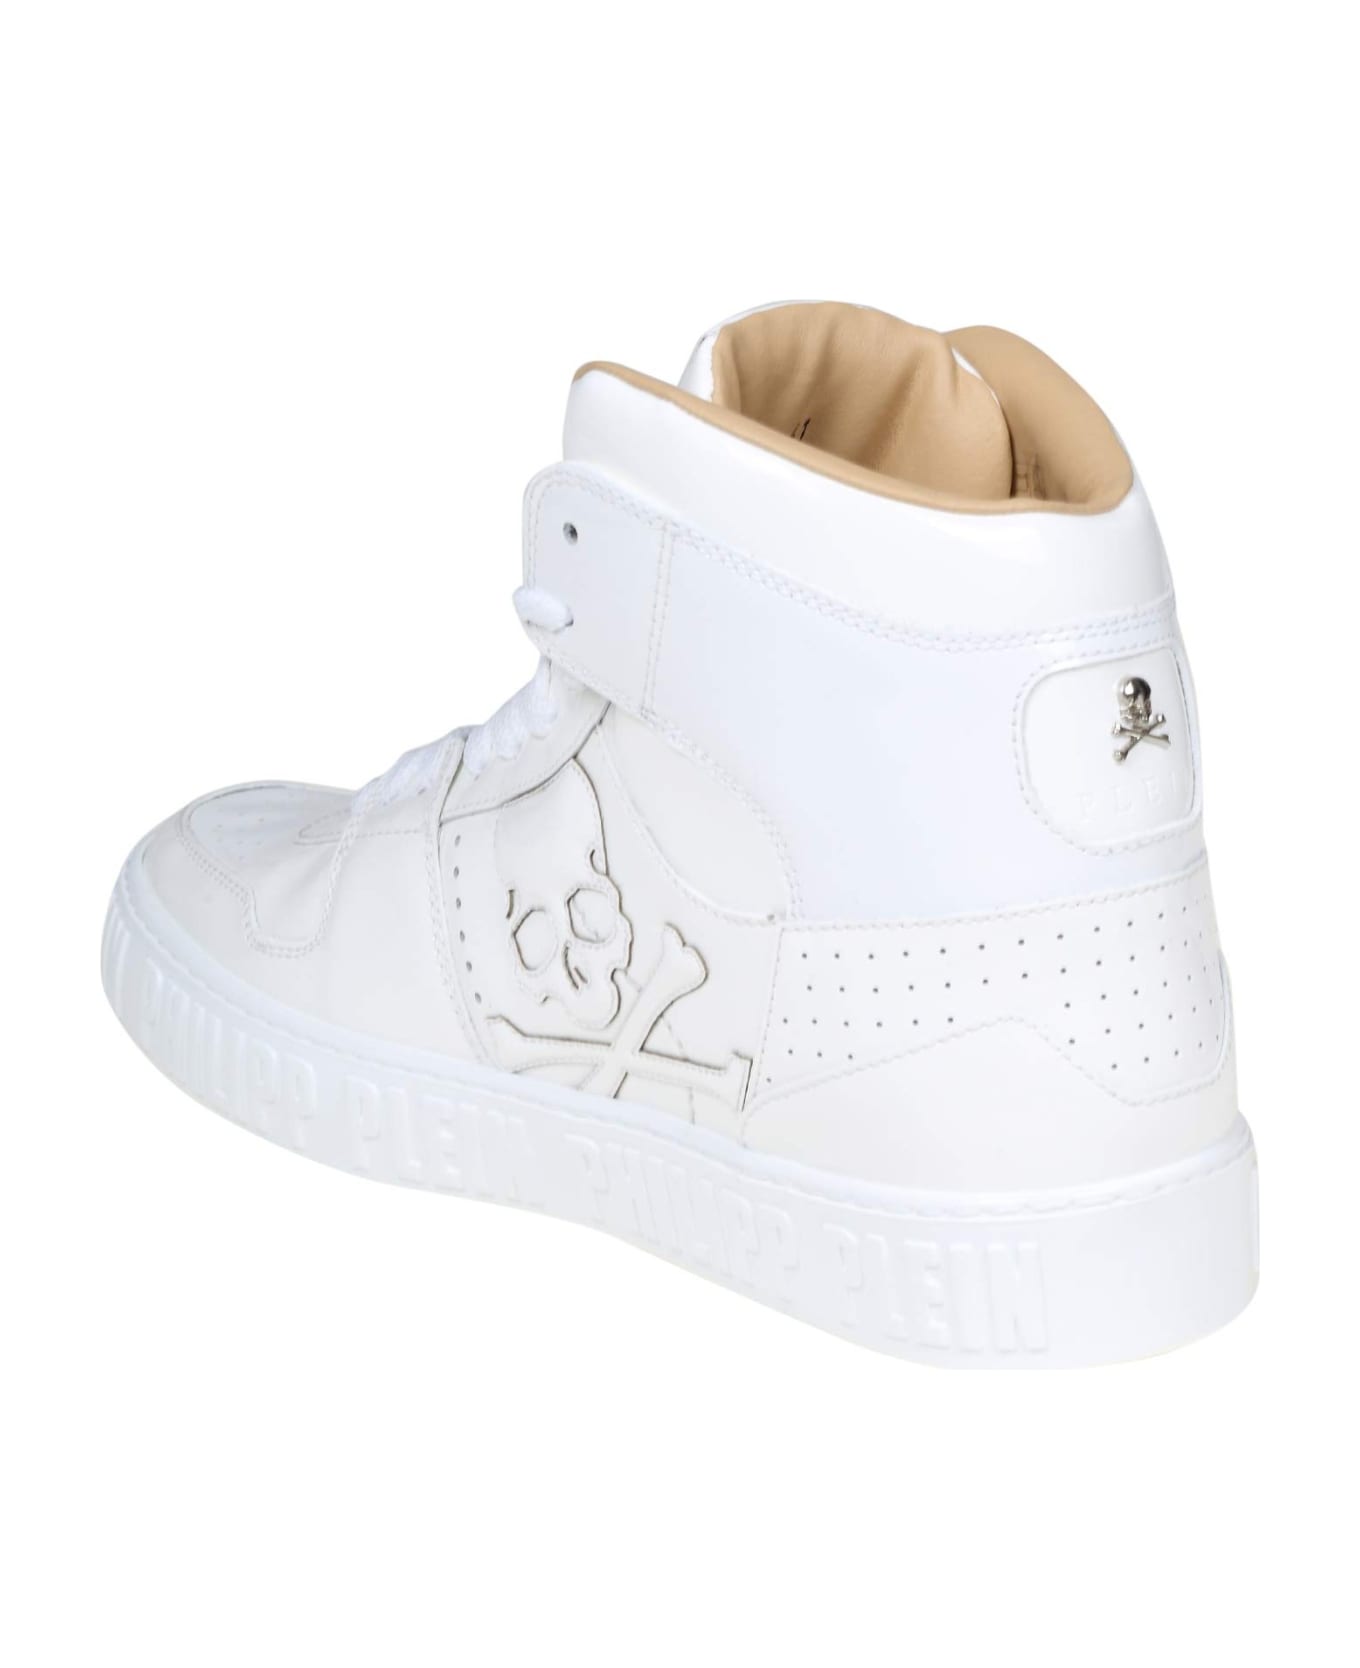 Philipp Plein Snaekers Hi Top In White Leather - White スニーカー